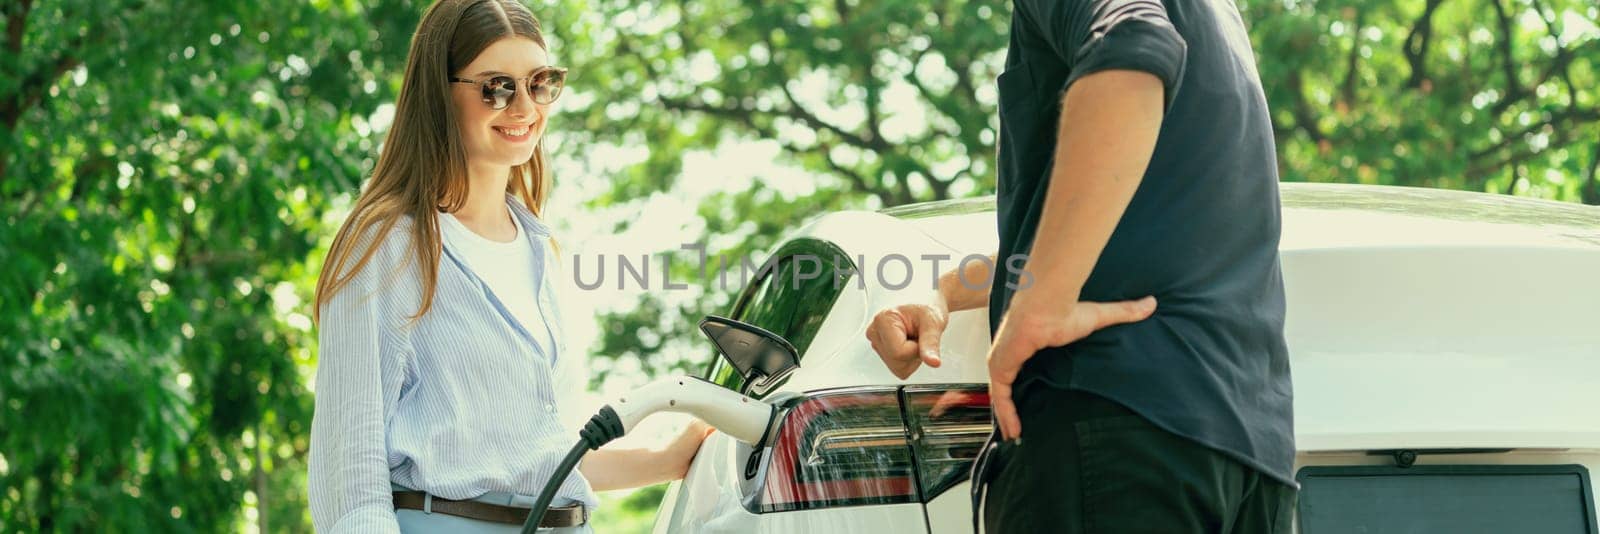 Focused EV car recharging electricity for battery on blurred background of lovey couple ruing their road trip travel by eco friendly electric car in national park and greenery forest on holiday. Exalt